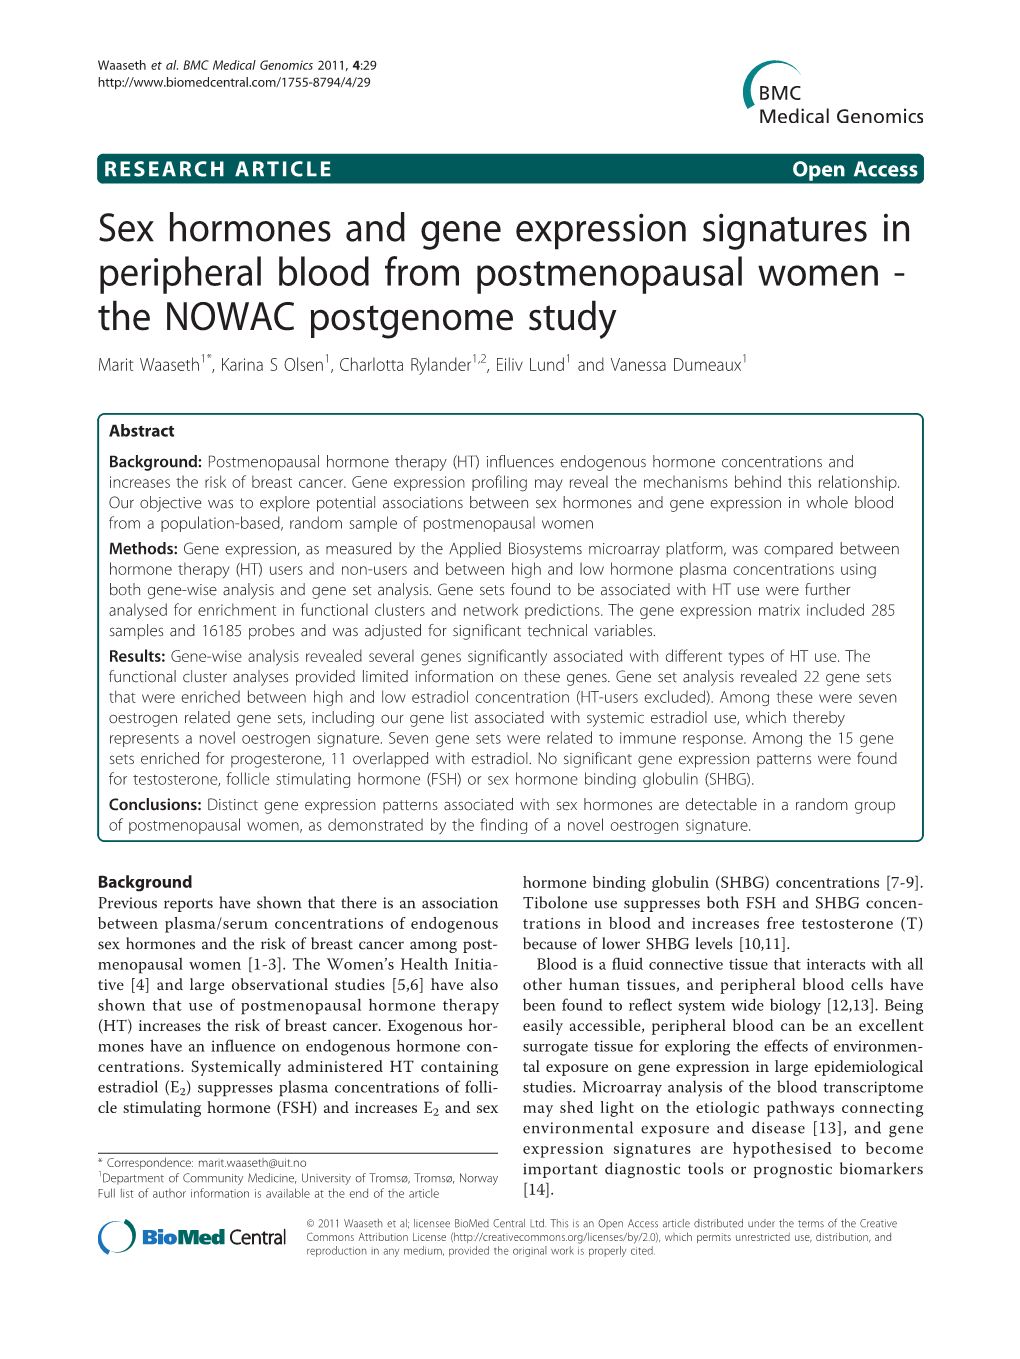 Sex Hormones and Gene Expression Signatures in Peripheral Blood from Postmenopausal Women